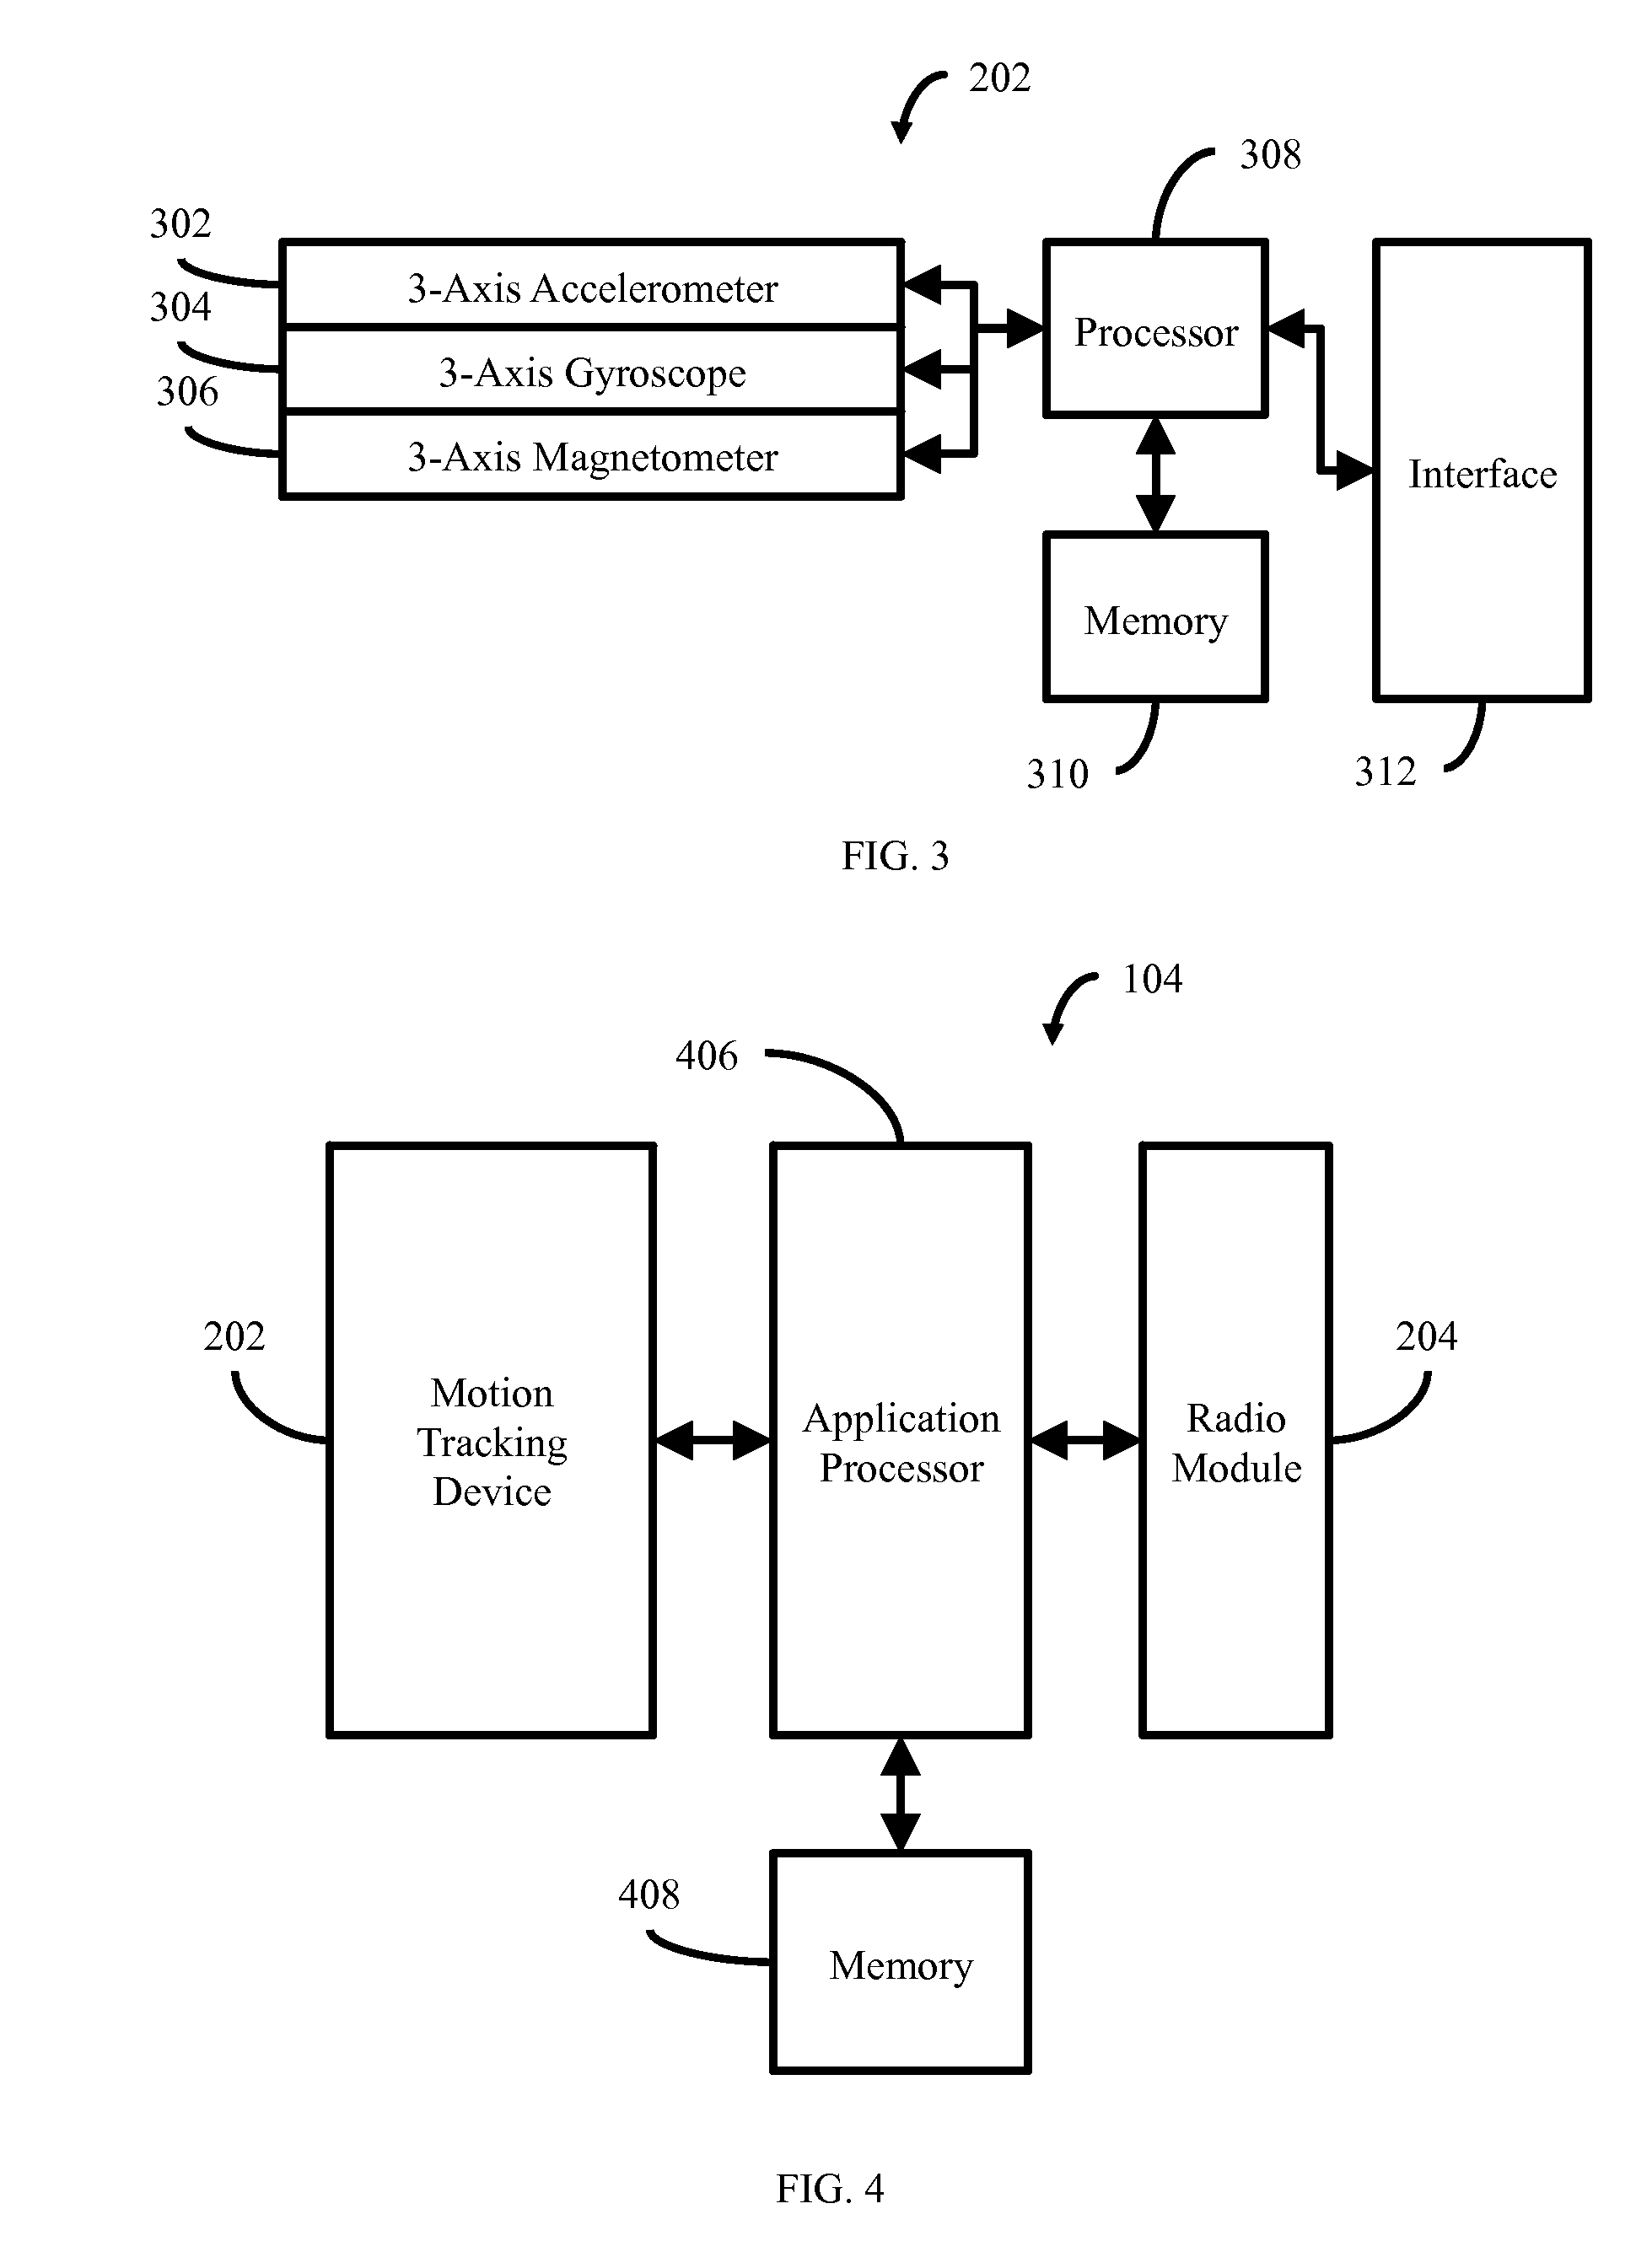 Method and Apparatus for Measuring Power Output of Exercise